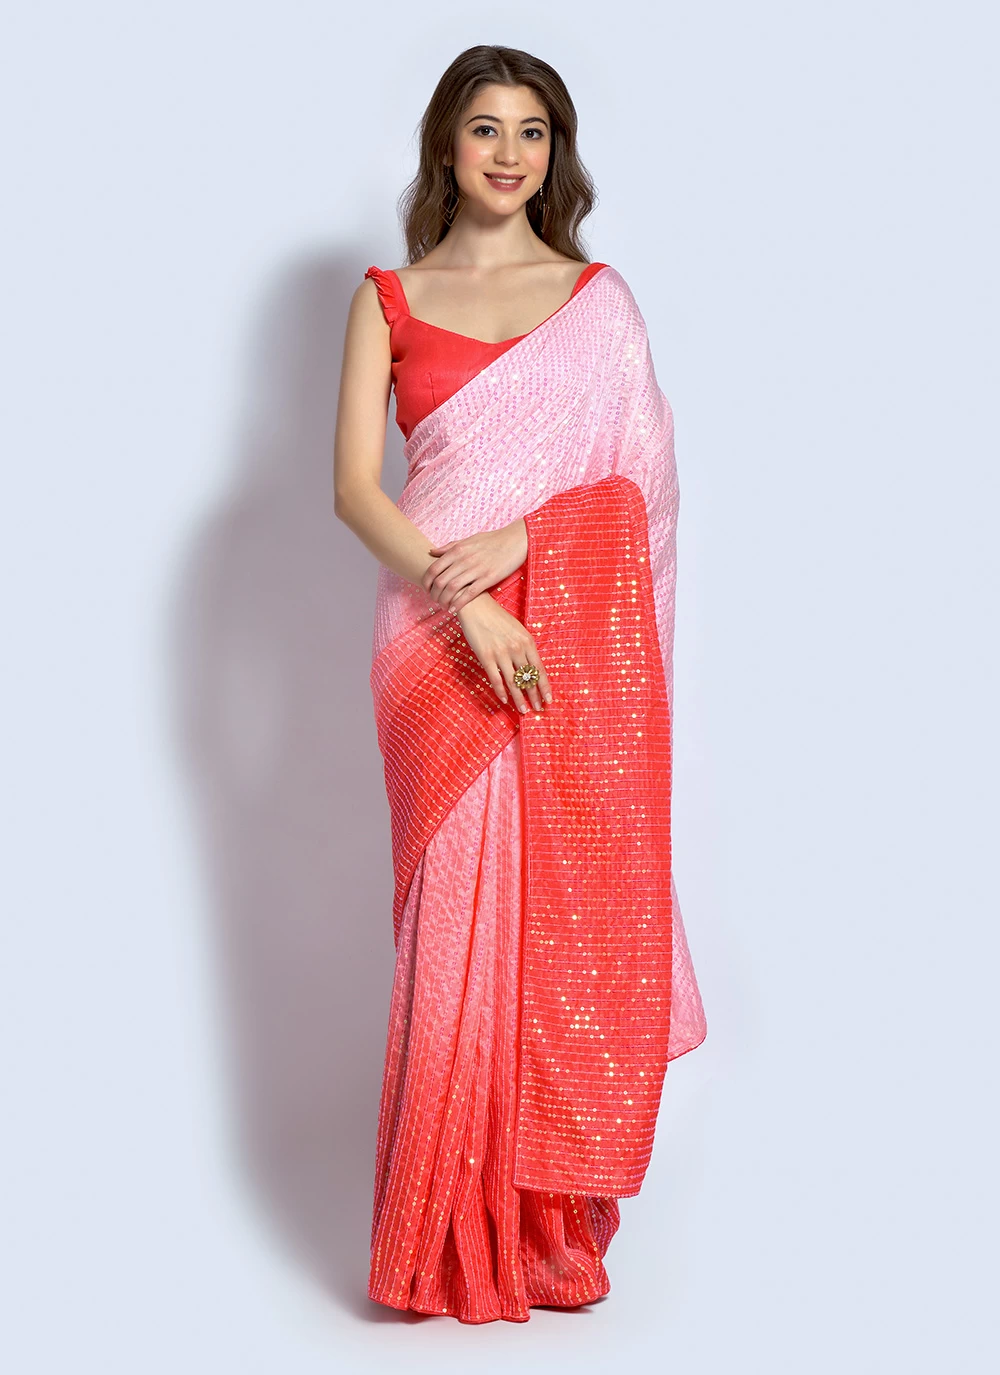 Double Shaded Weave Patterned Semi Silk Saree |KRK275